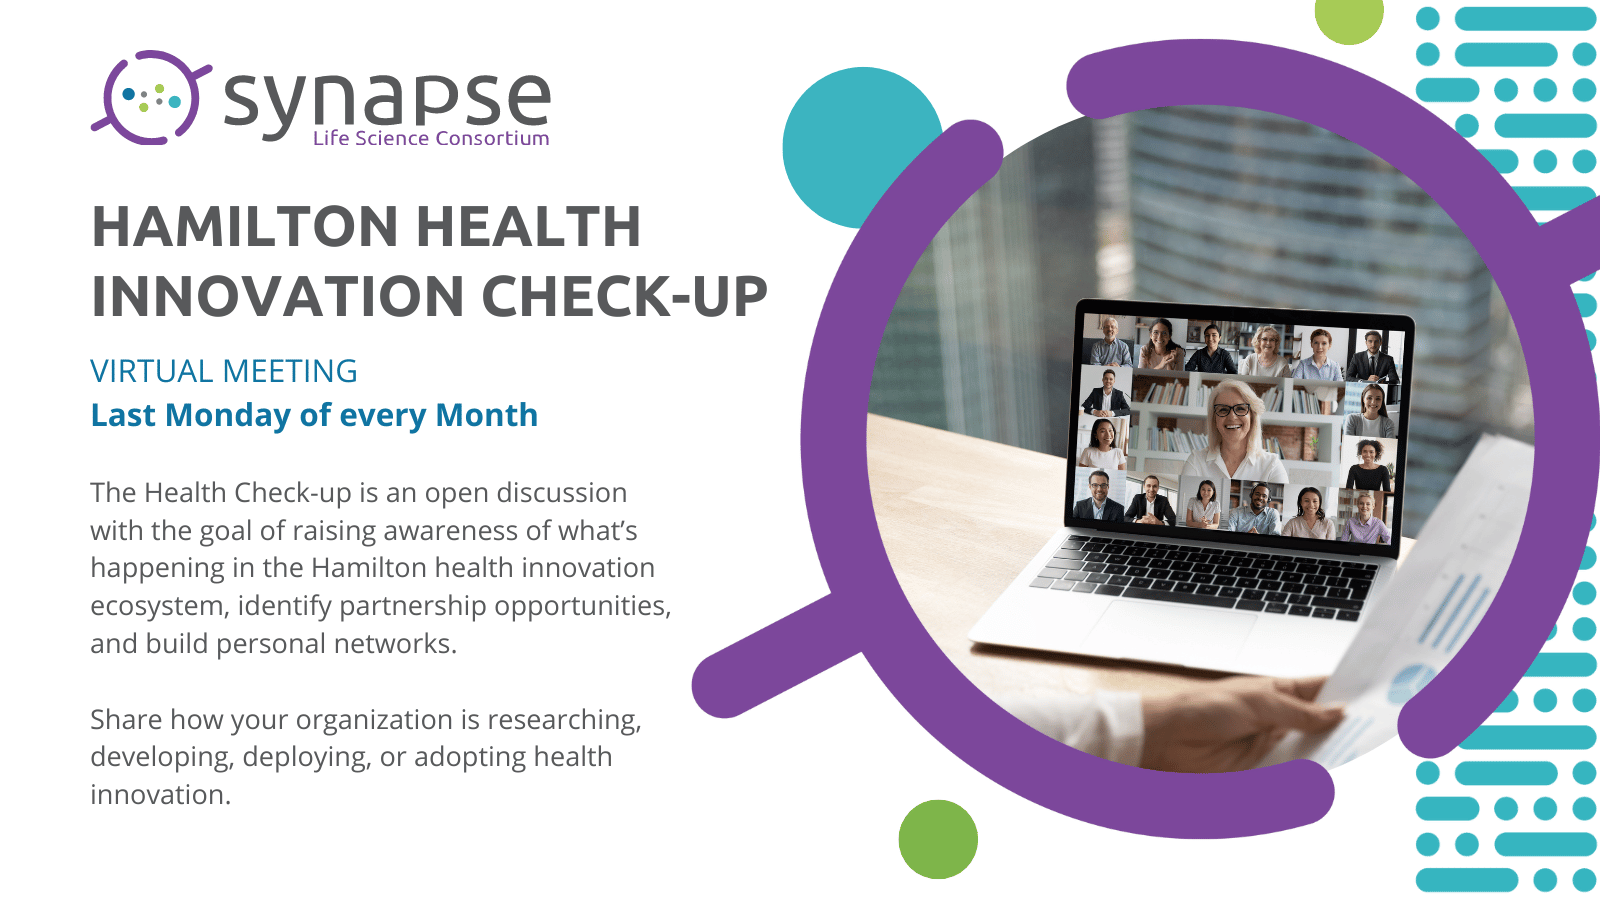 Hamilton Health Innovation Checkup virtual meeting on the last monday of every month, hosted by Synapse Life Science Consortium